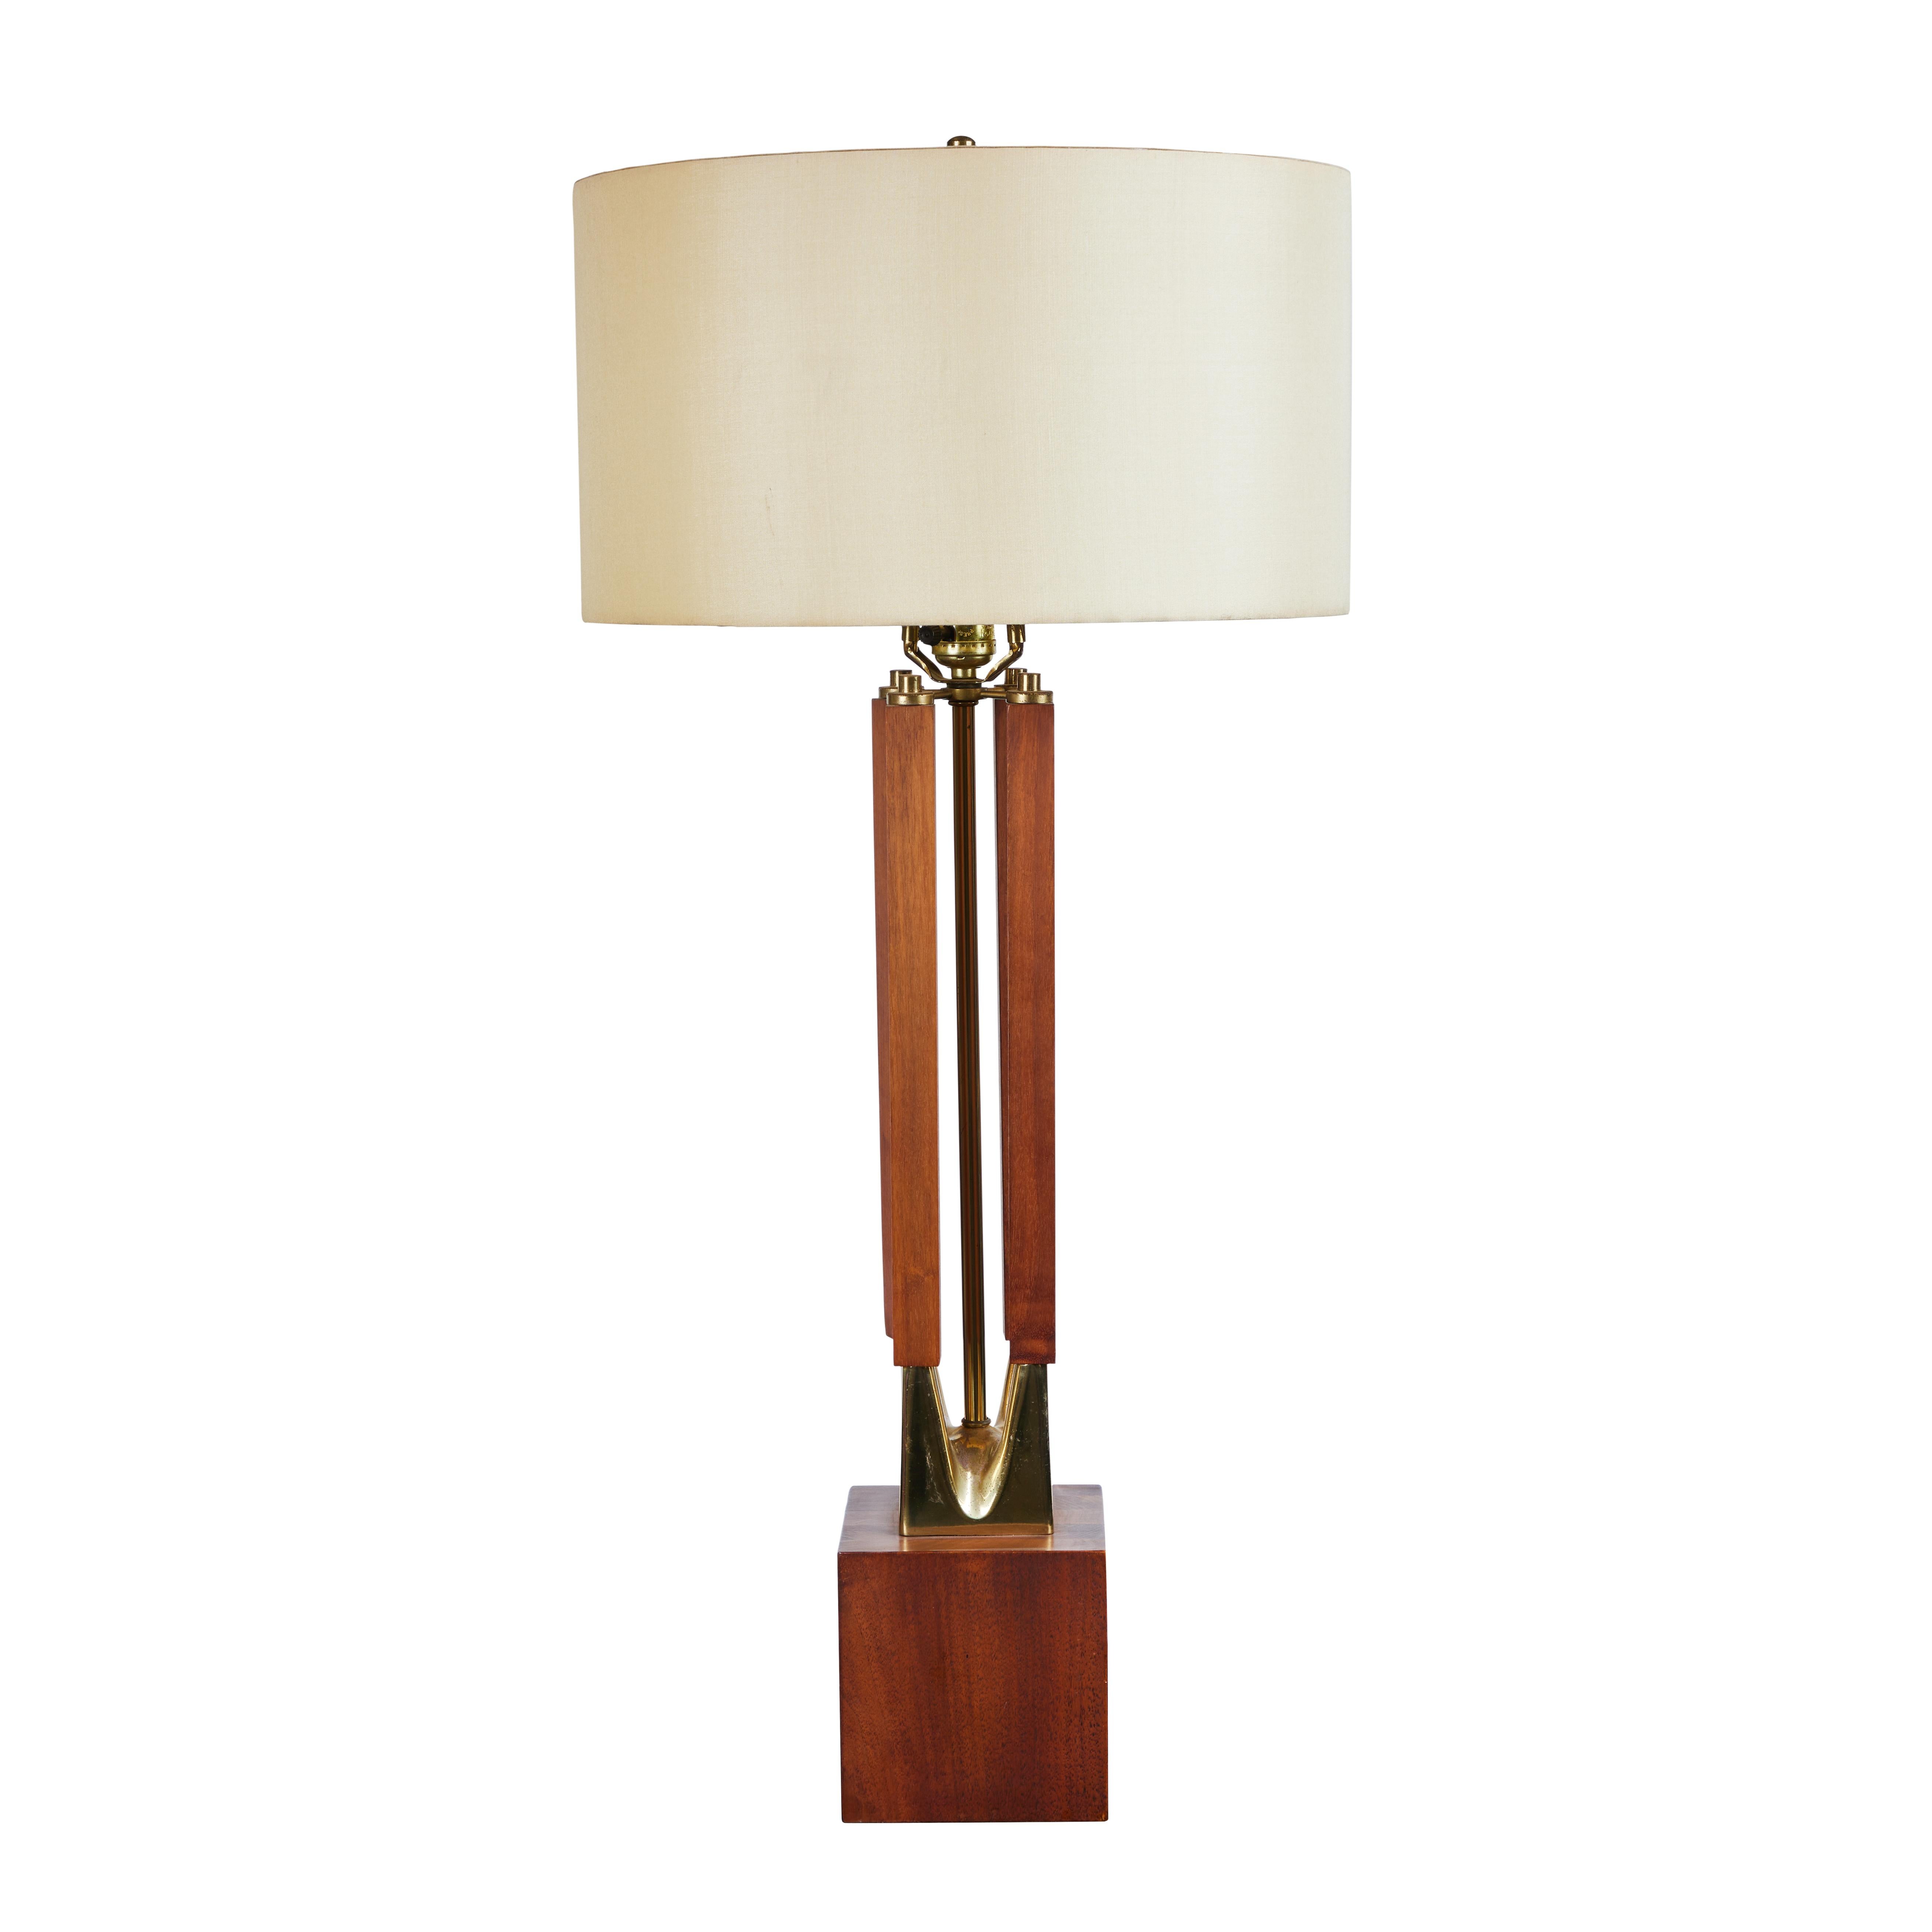 A stunning pair of large-scale lamps by Laurel Lamp Company, circa 1960's.  Handsome architectural form executed in solid walnut with brass accents, atop a solid walnut plinth.  mellowed to absolute perfection.  lamps are from an estate with one